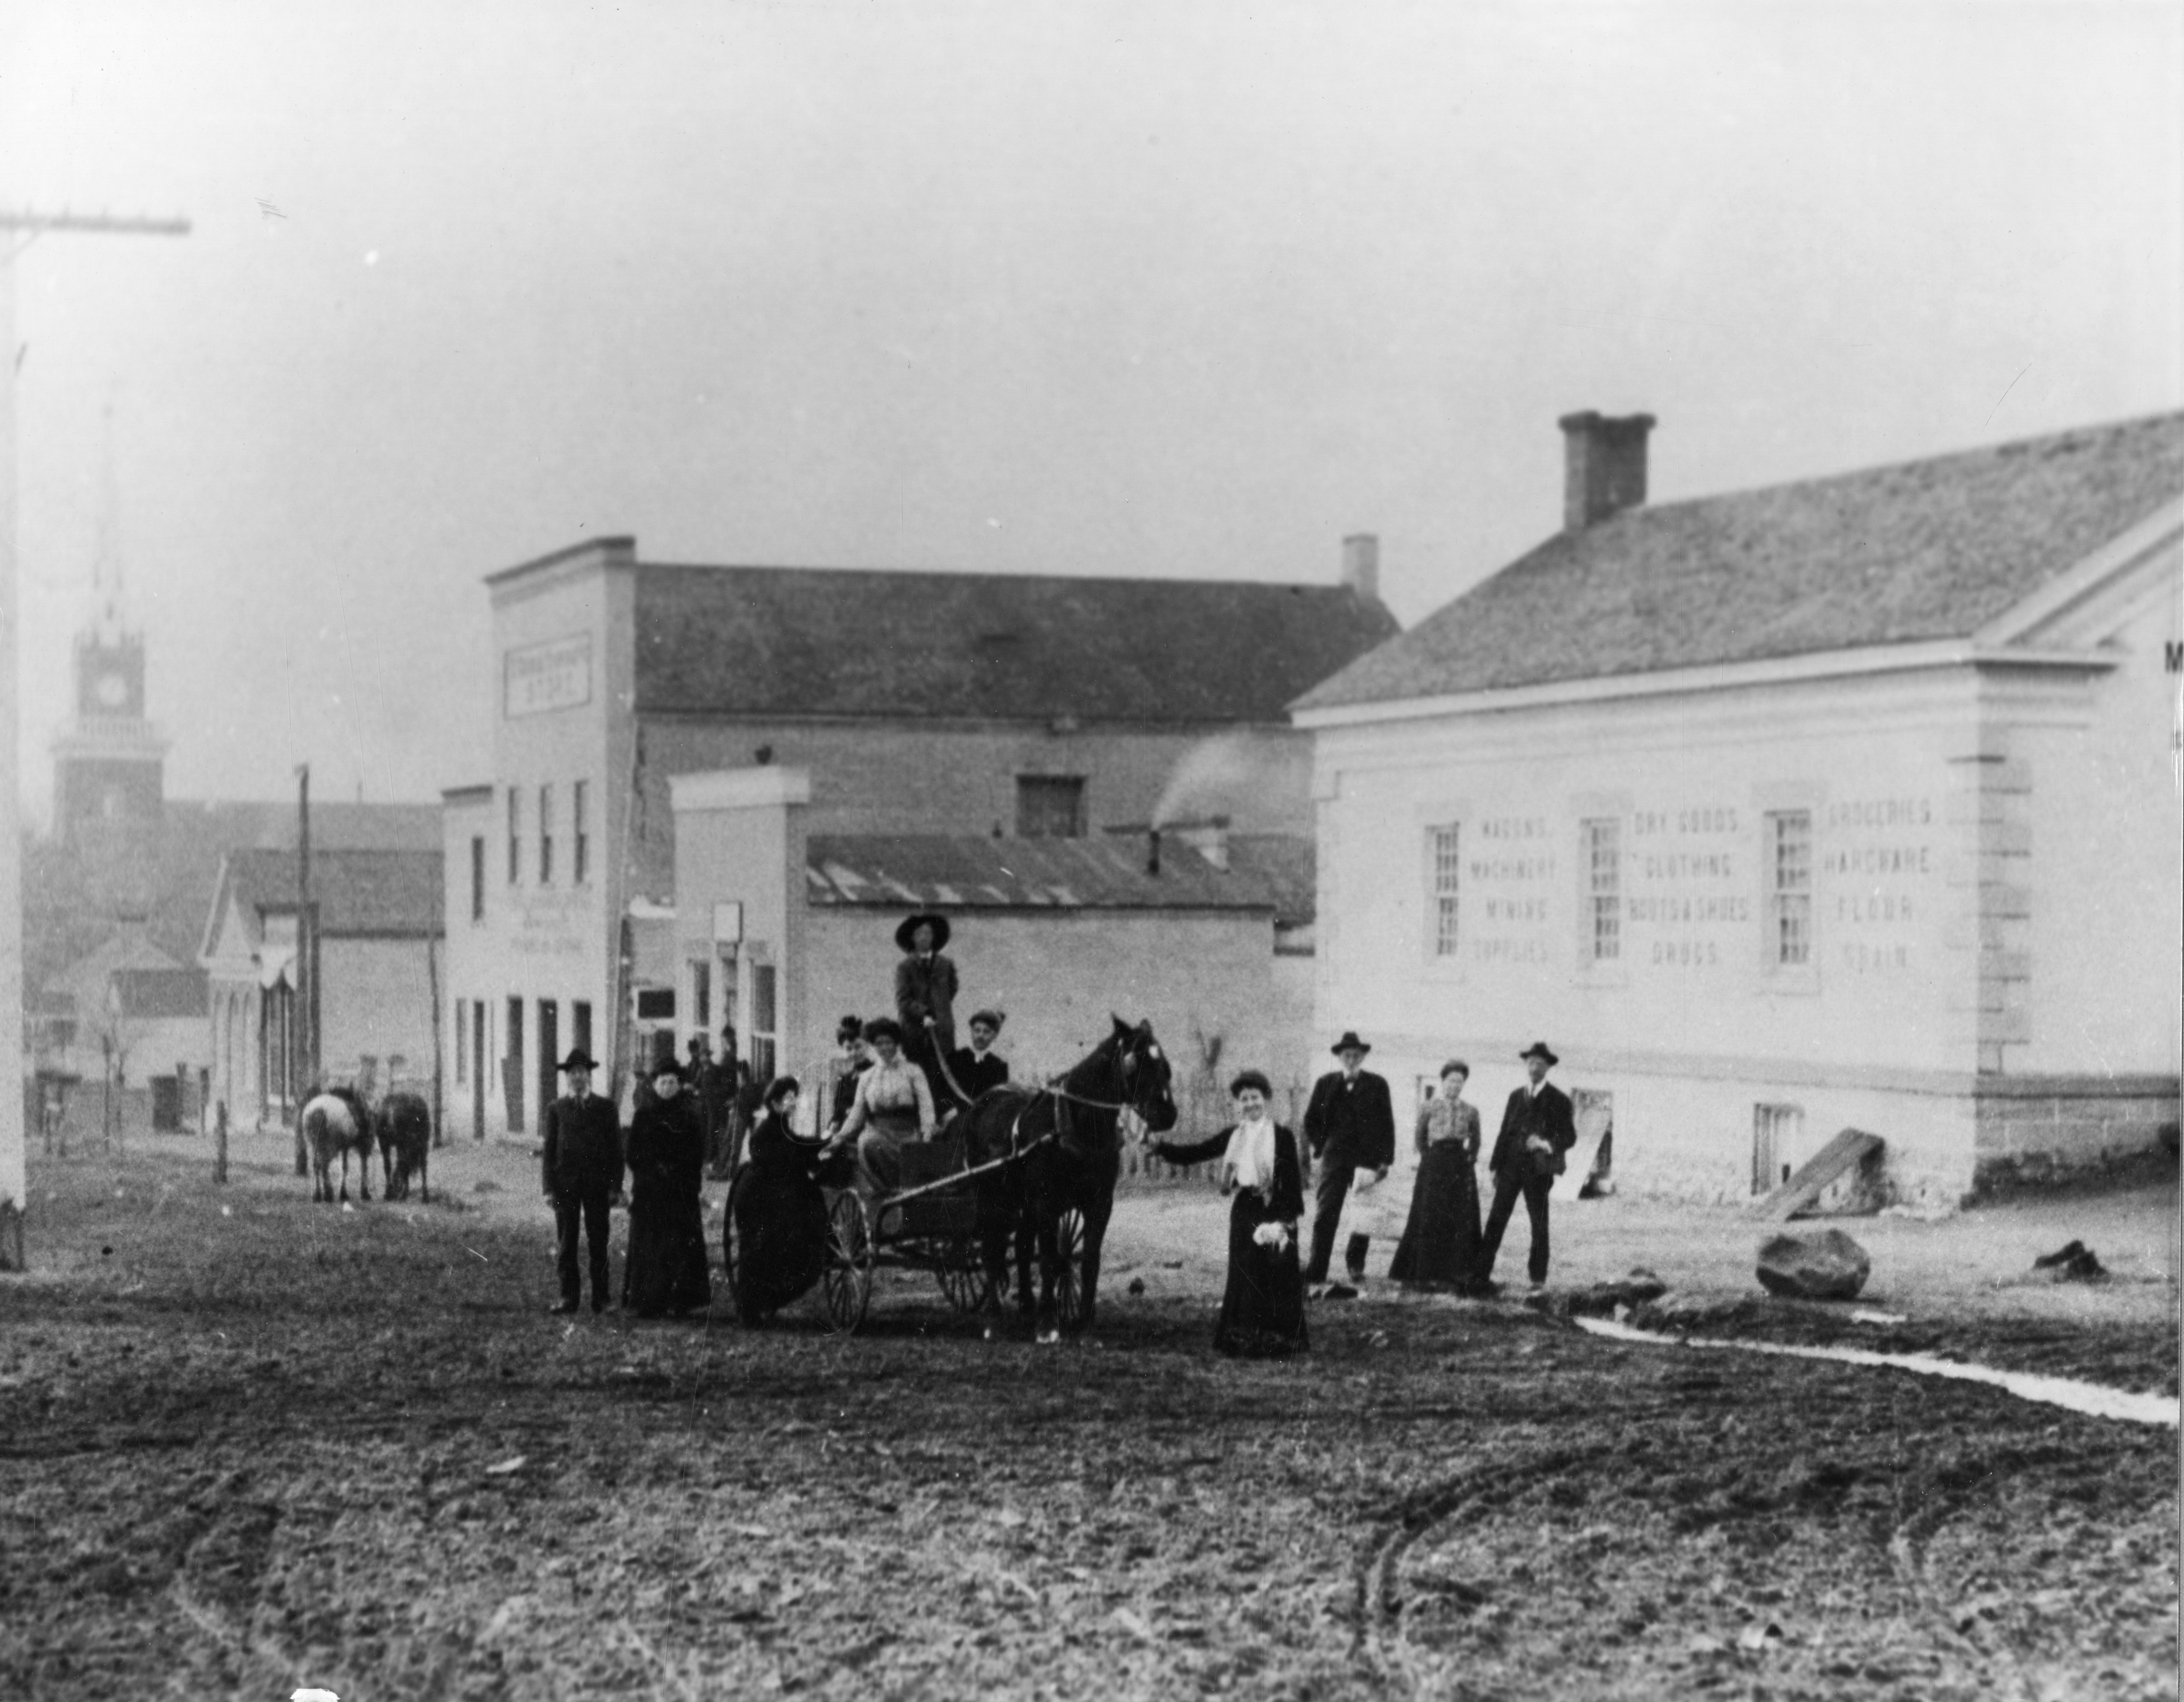 A wagon and people on Main Street just south of 100 North in St. George